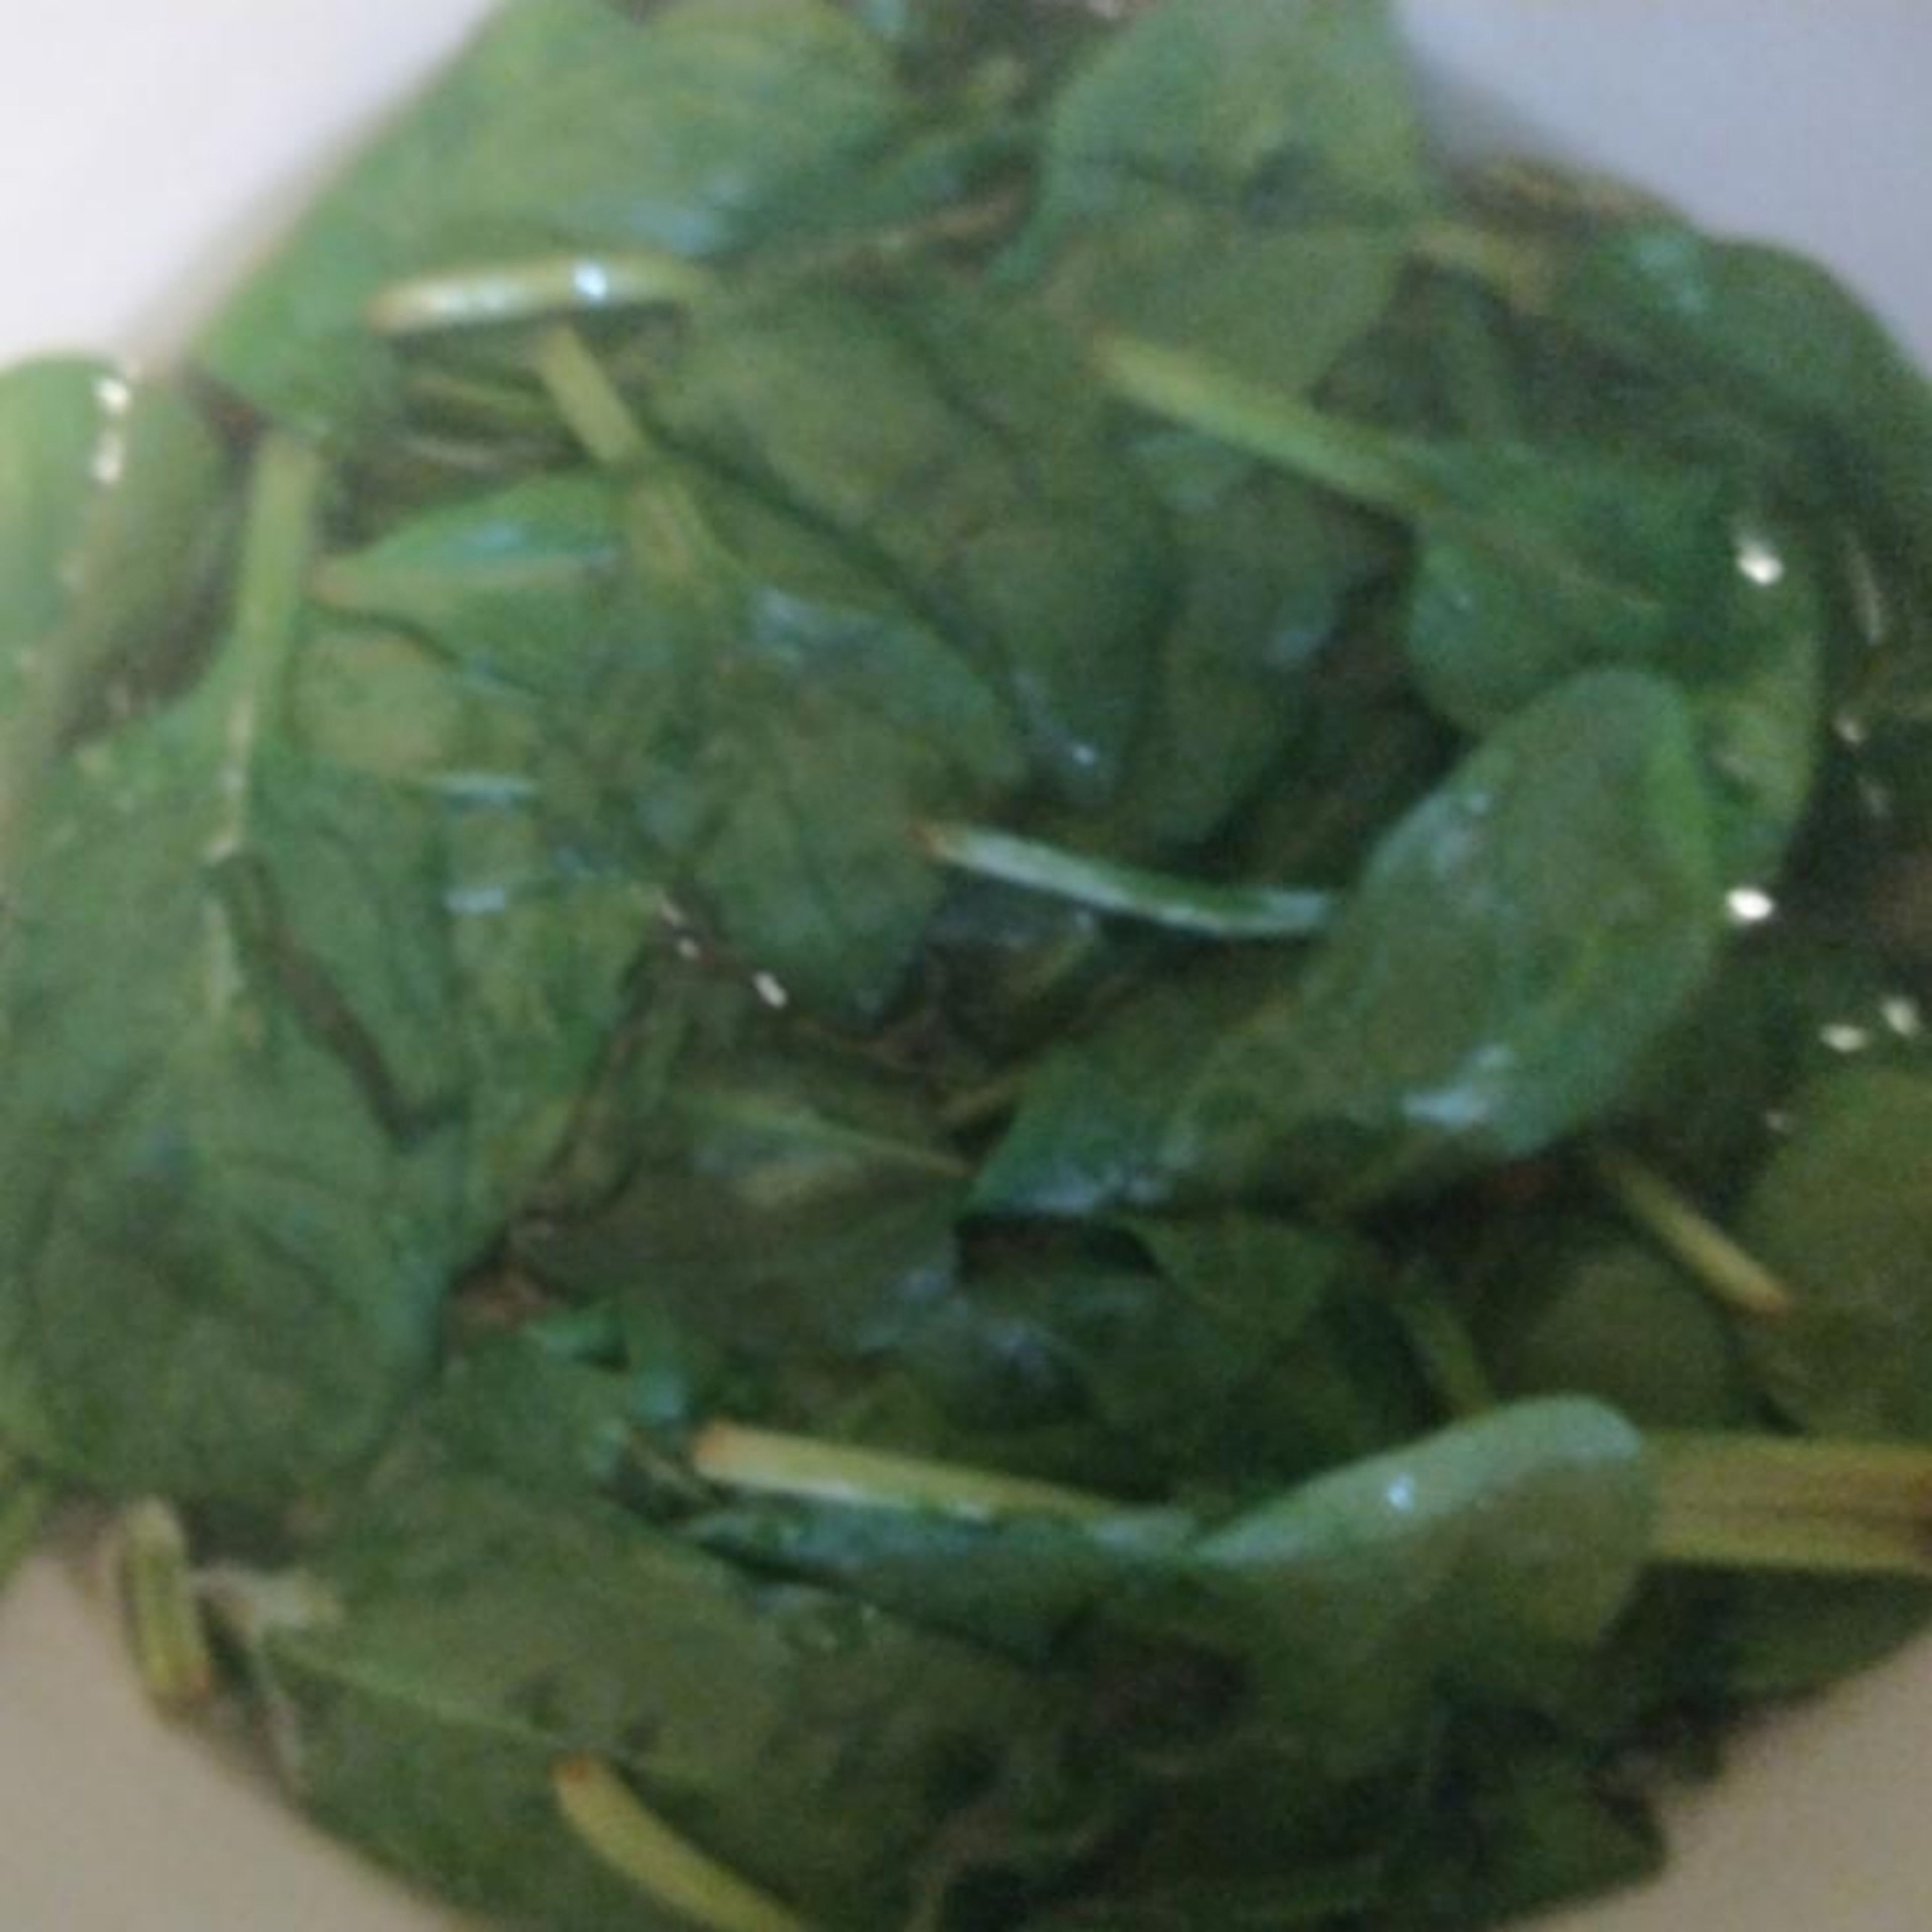 Place the spinach in a bowl, and pour over boiling water to cover. Let rest until wilted. Drain, and add the chilli, some nutmeg and soy sauce, then blend until smooth.